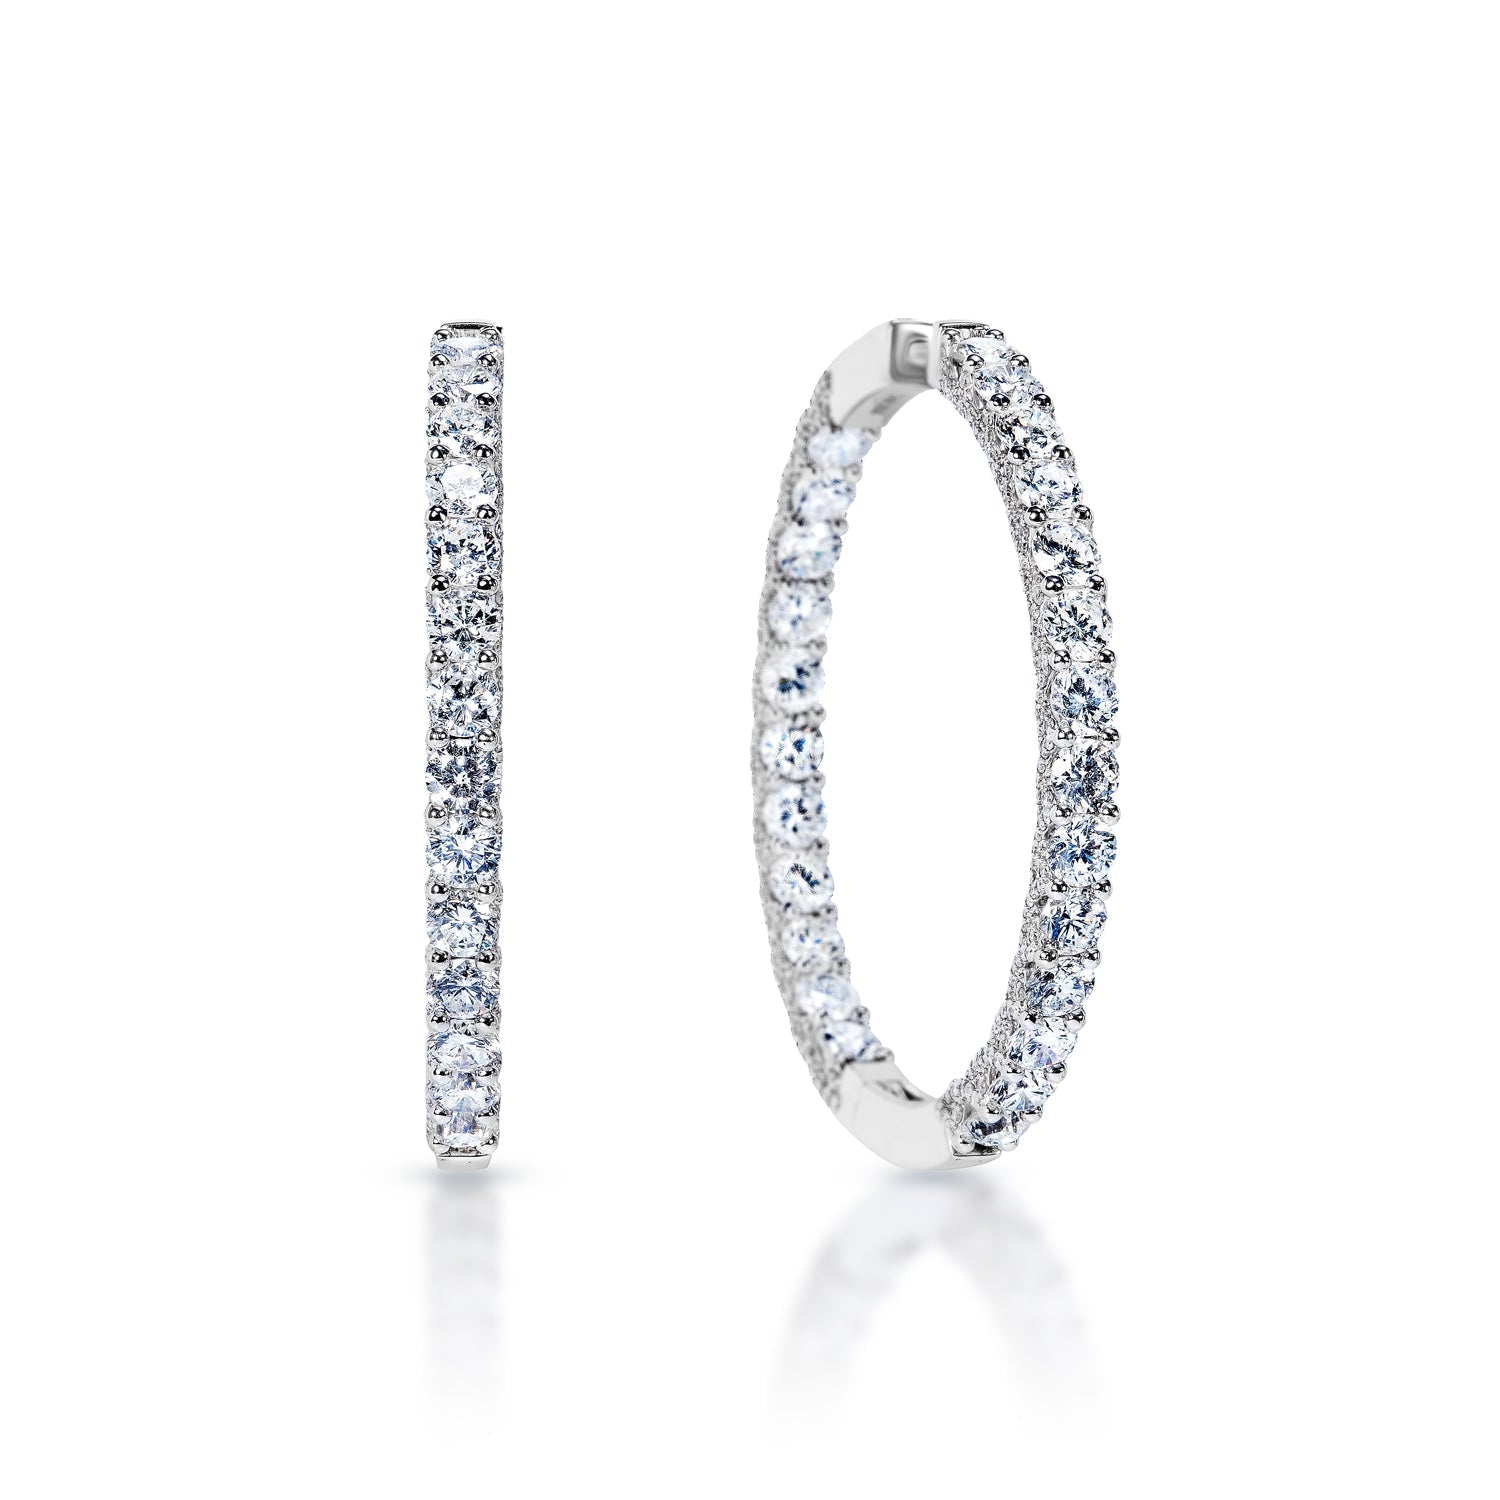 Melany 13 Carat Round Brilliant Diamond Hoops Earrings in 14k White Gold Front and Side View